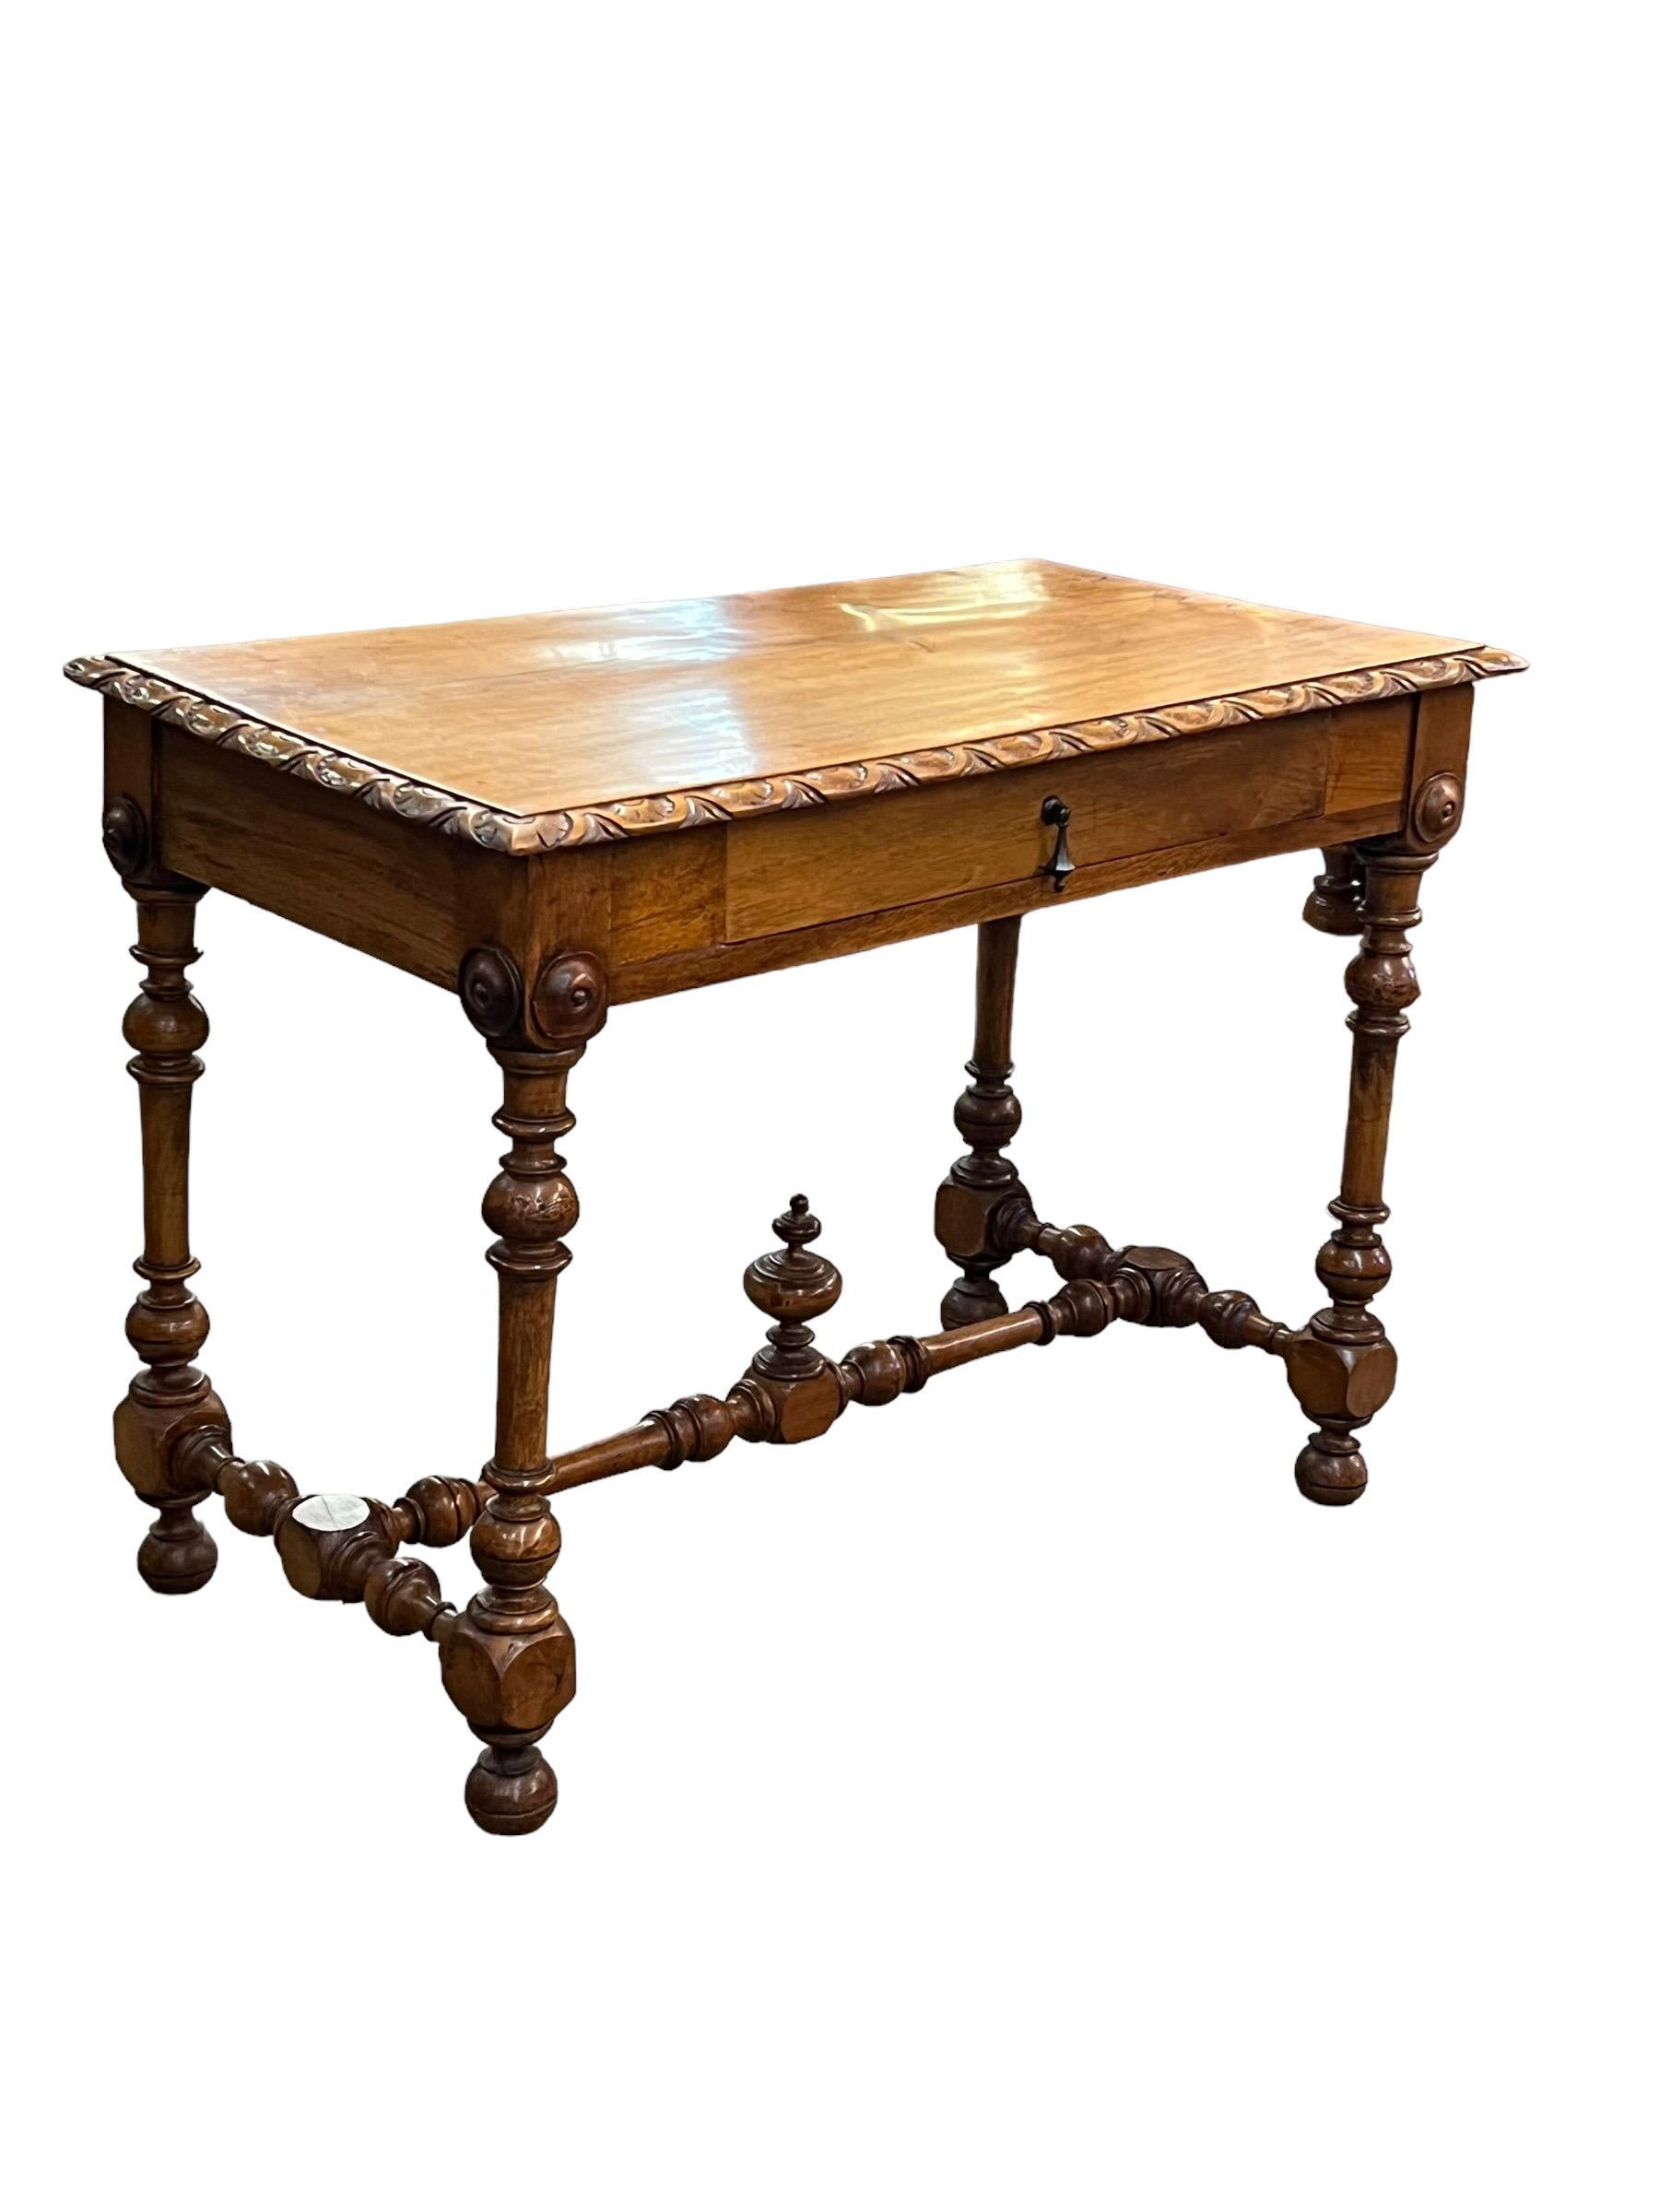 Elegant 19th century French Baroque style fruitwood writing table with tapered turned legs, x-Vintage Gold Mirror With Detailed Base stretcher with urn finial; single drawer. The top panel is made from one solid slab waith hand carved